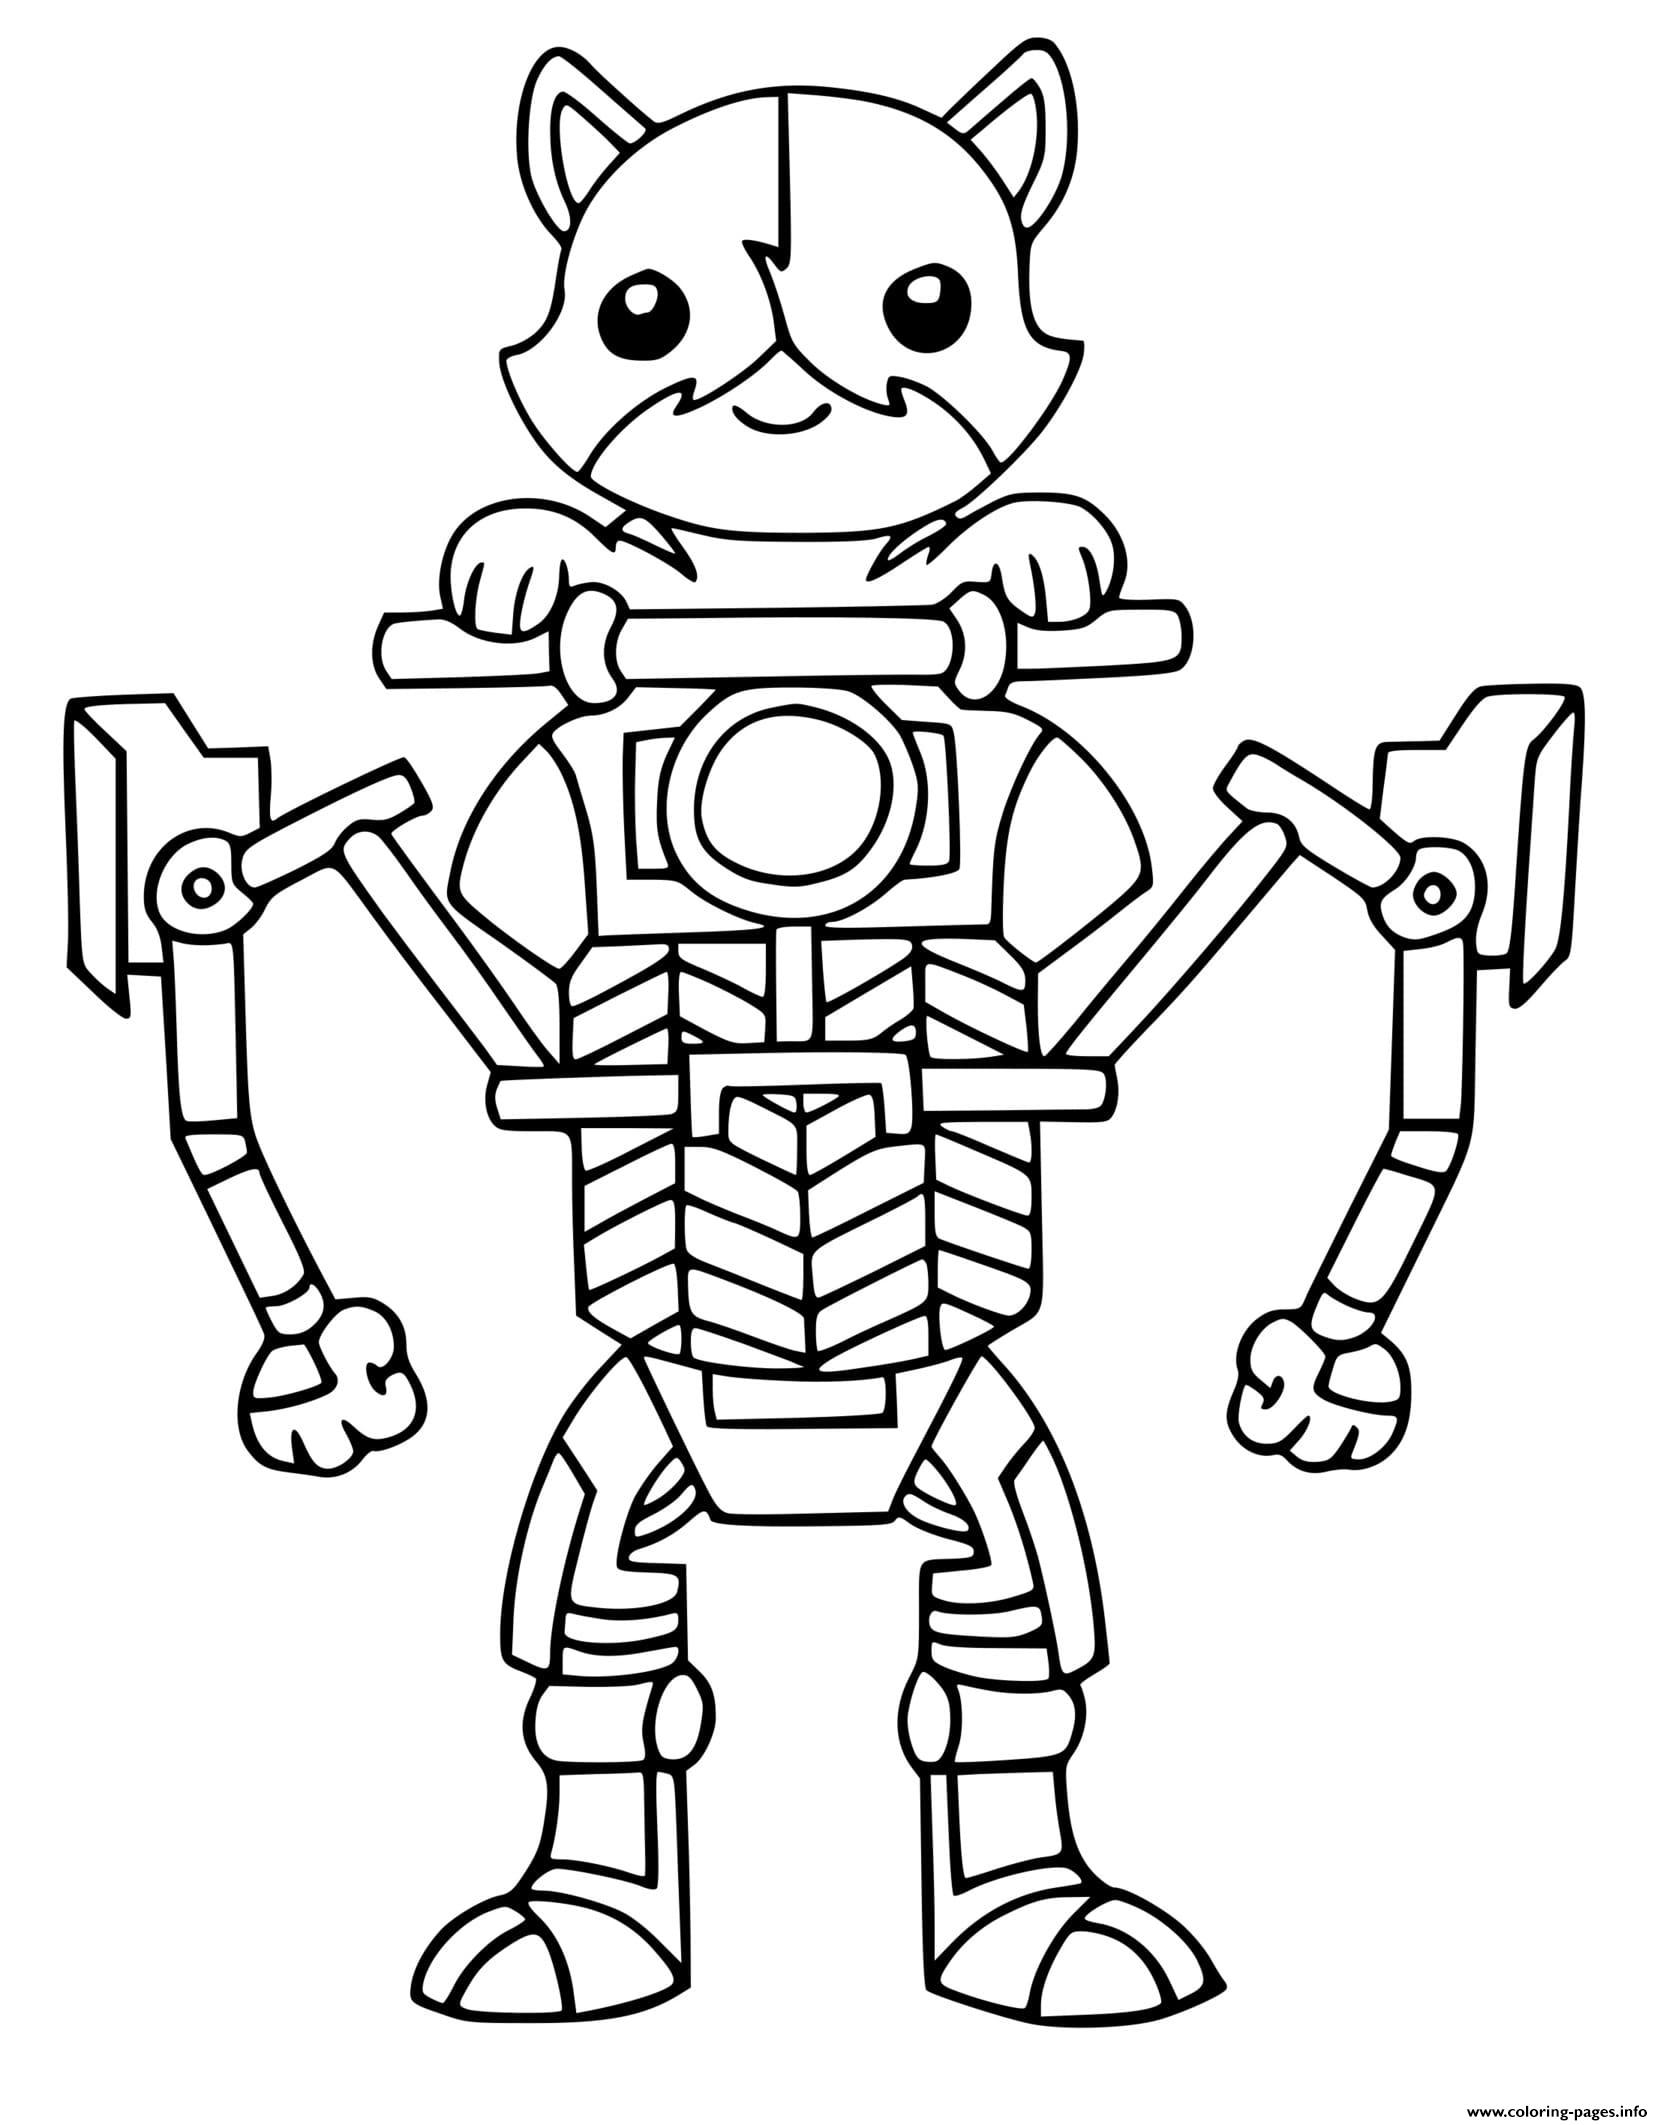 Fortnite Coloring Pages Meowscles Coloring Pages